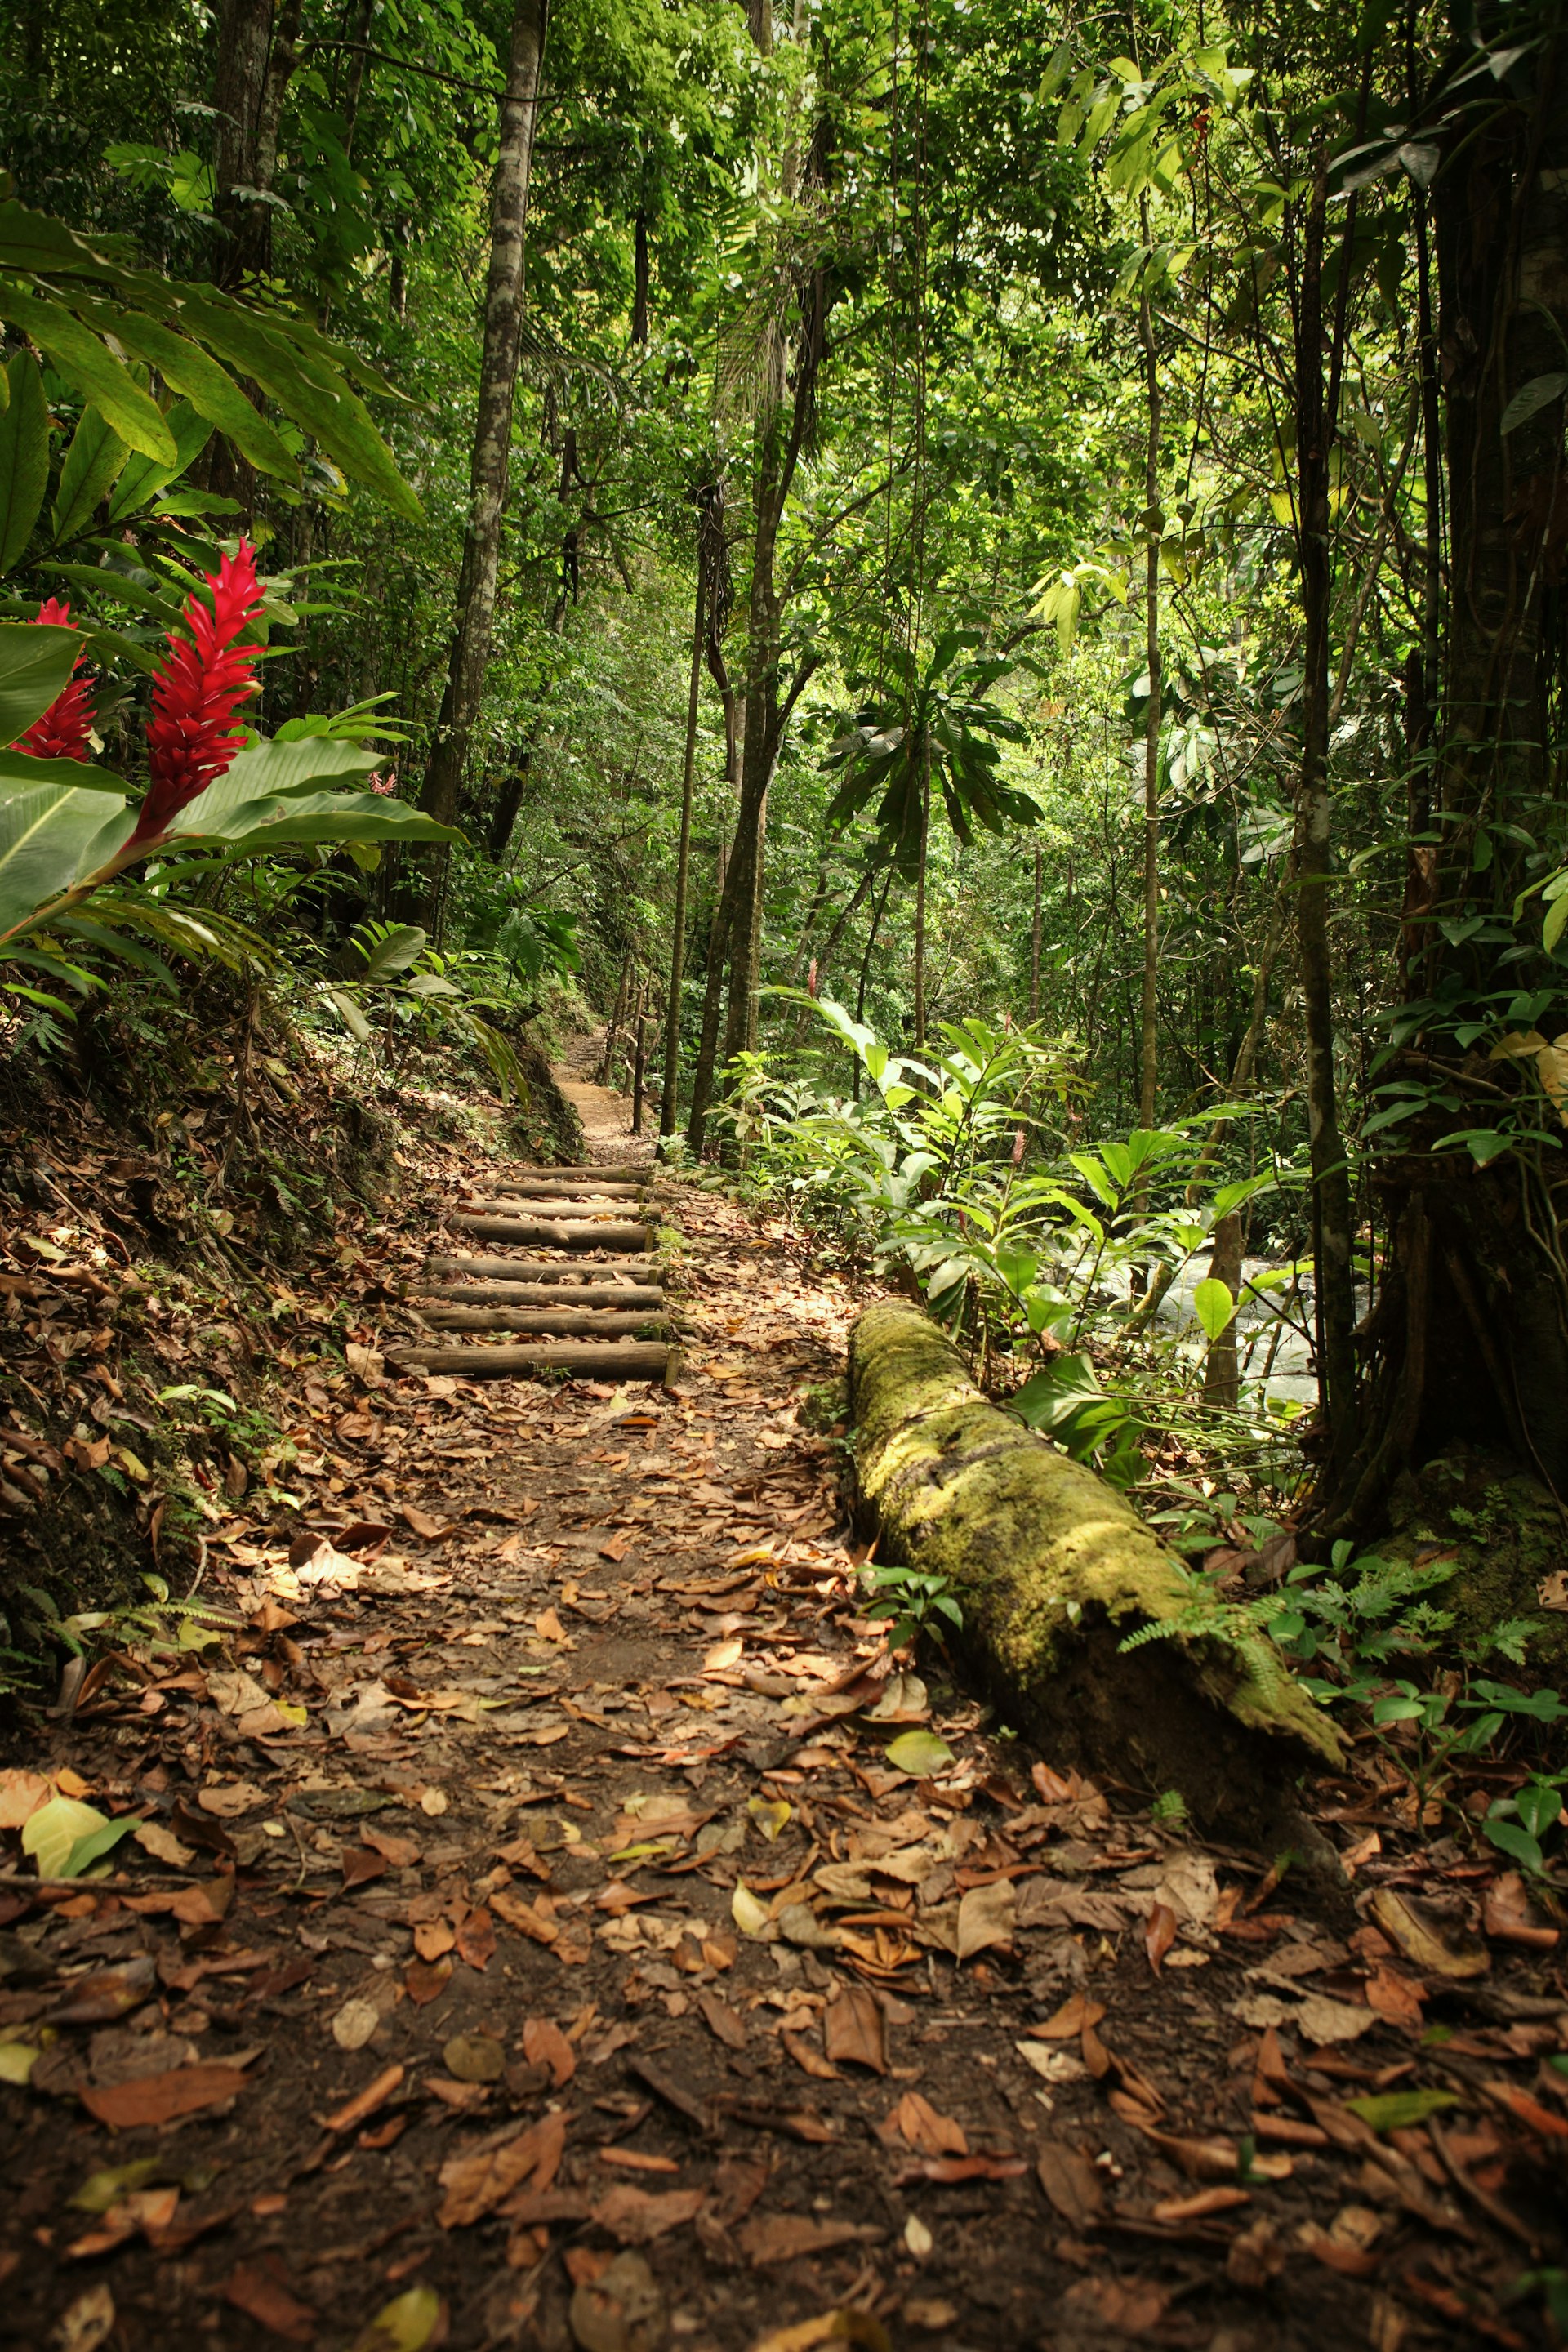 A forest ground covered in leaves leads to a row of wooden steps. There are bright flowers on the left side of the image.  